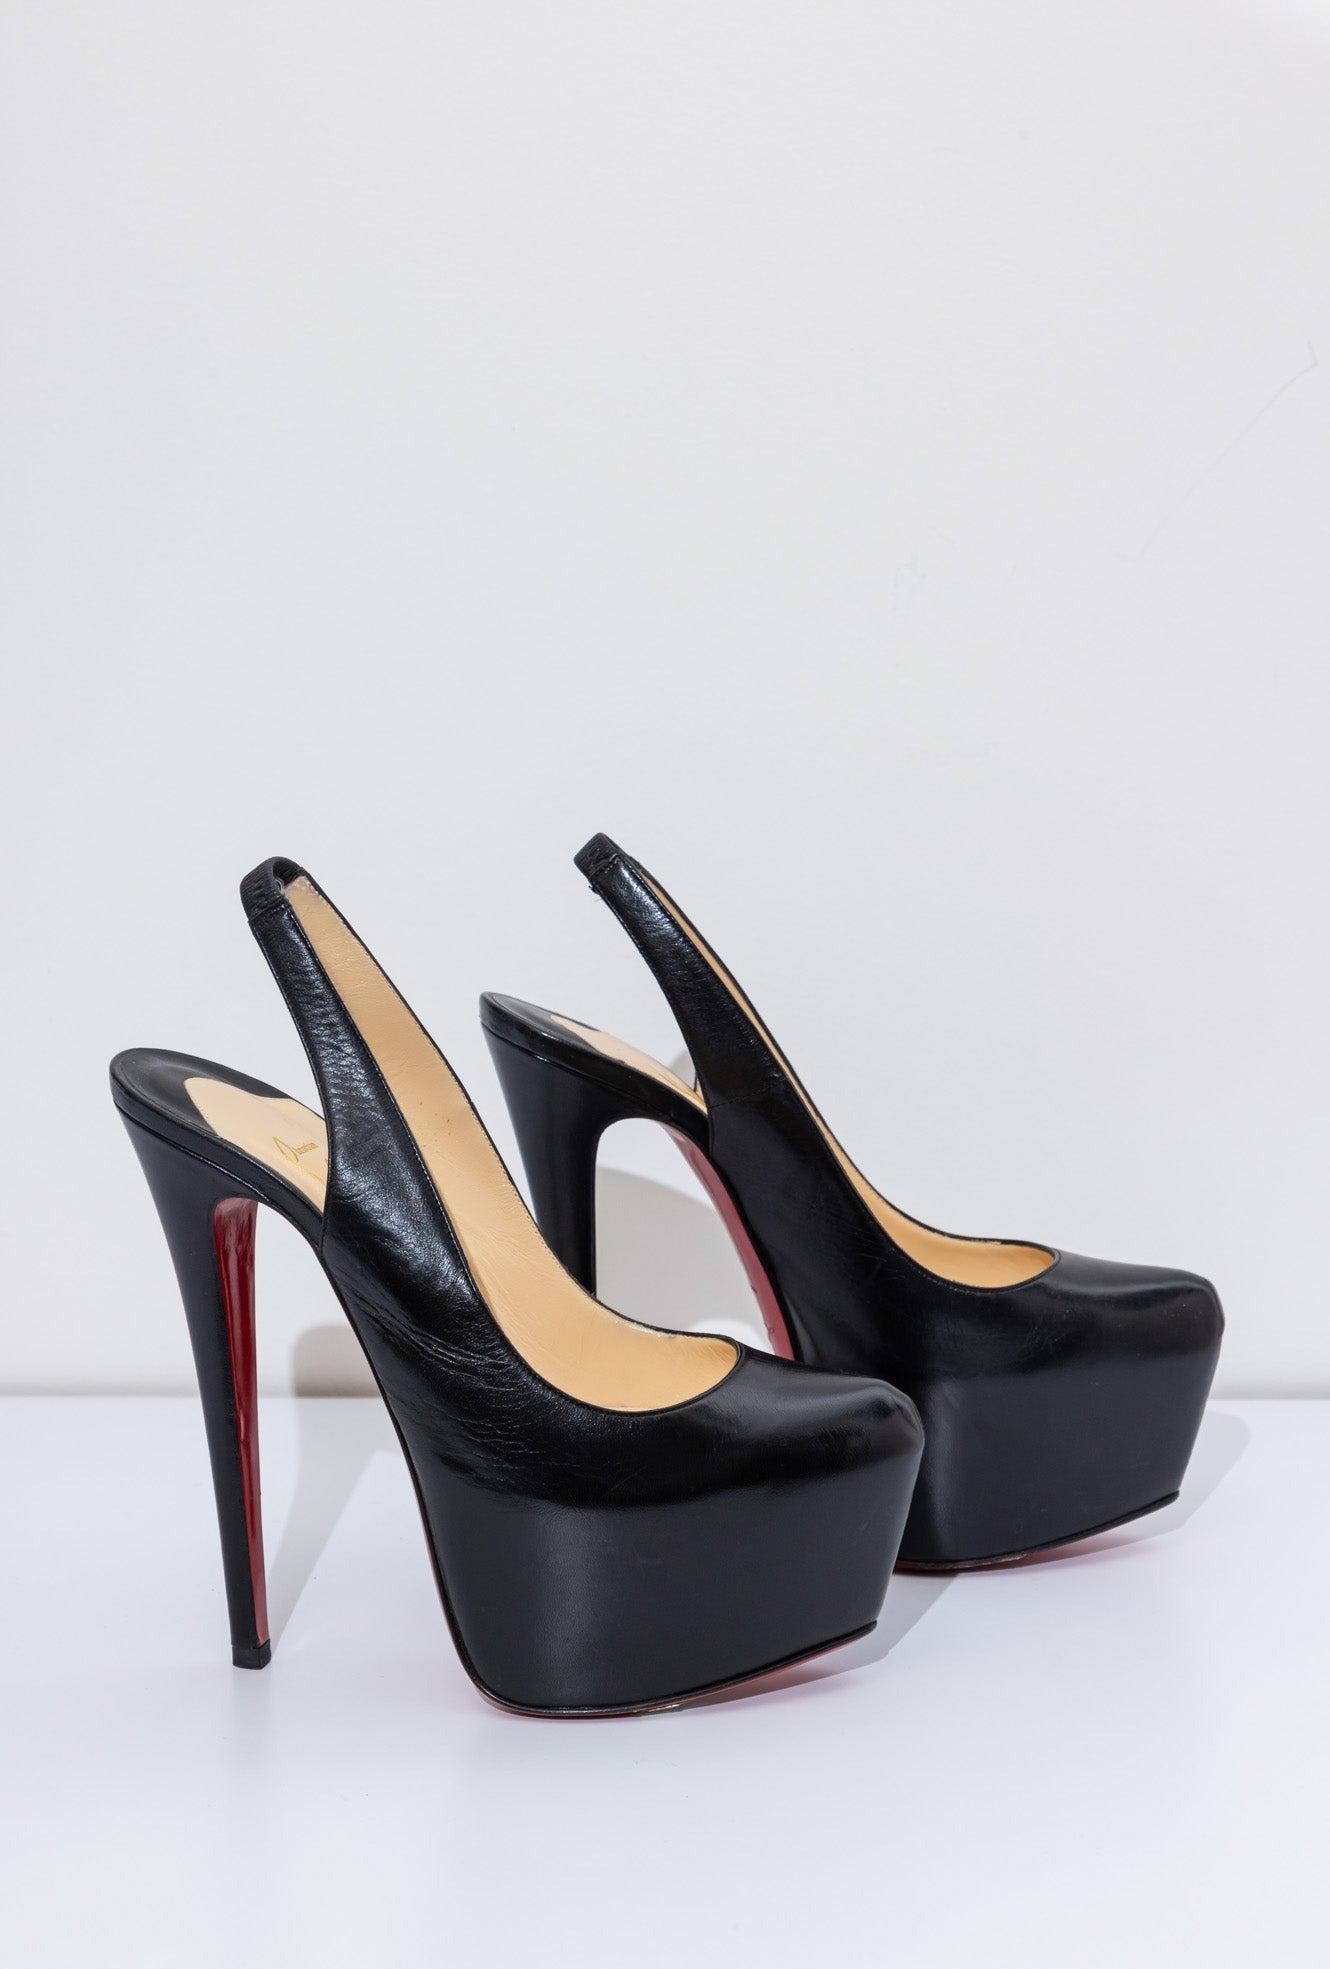 CHRISTIAN LOUBOUTIN Black Leather Pumps | Size IT 37.5 | New, Never Worn | Made in Italy